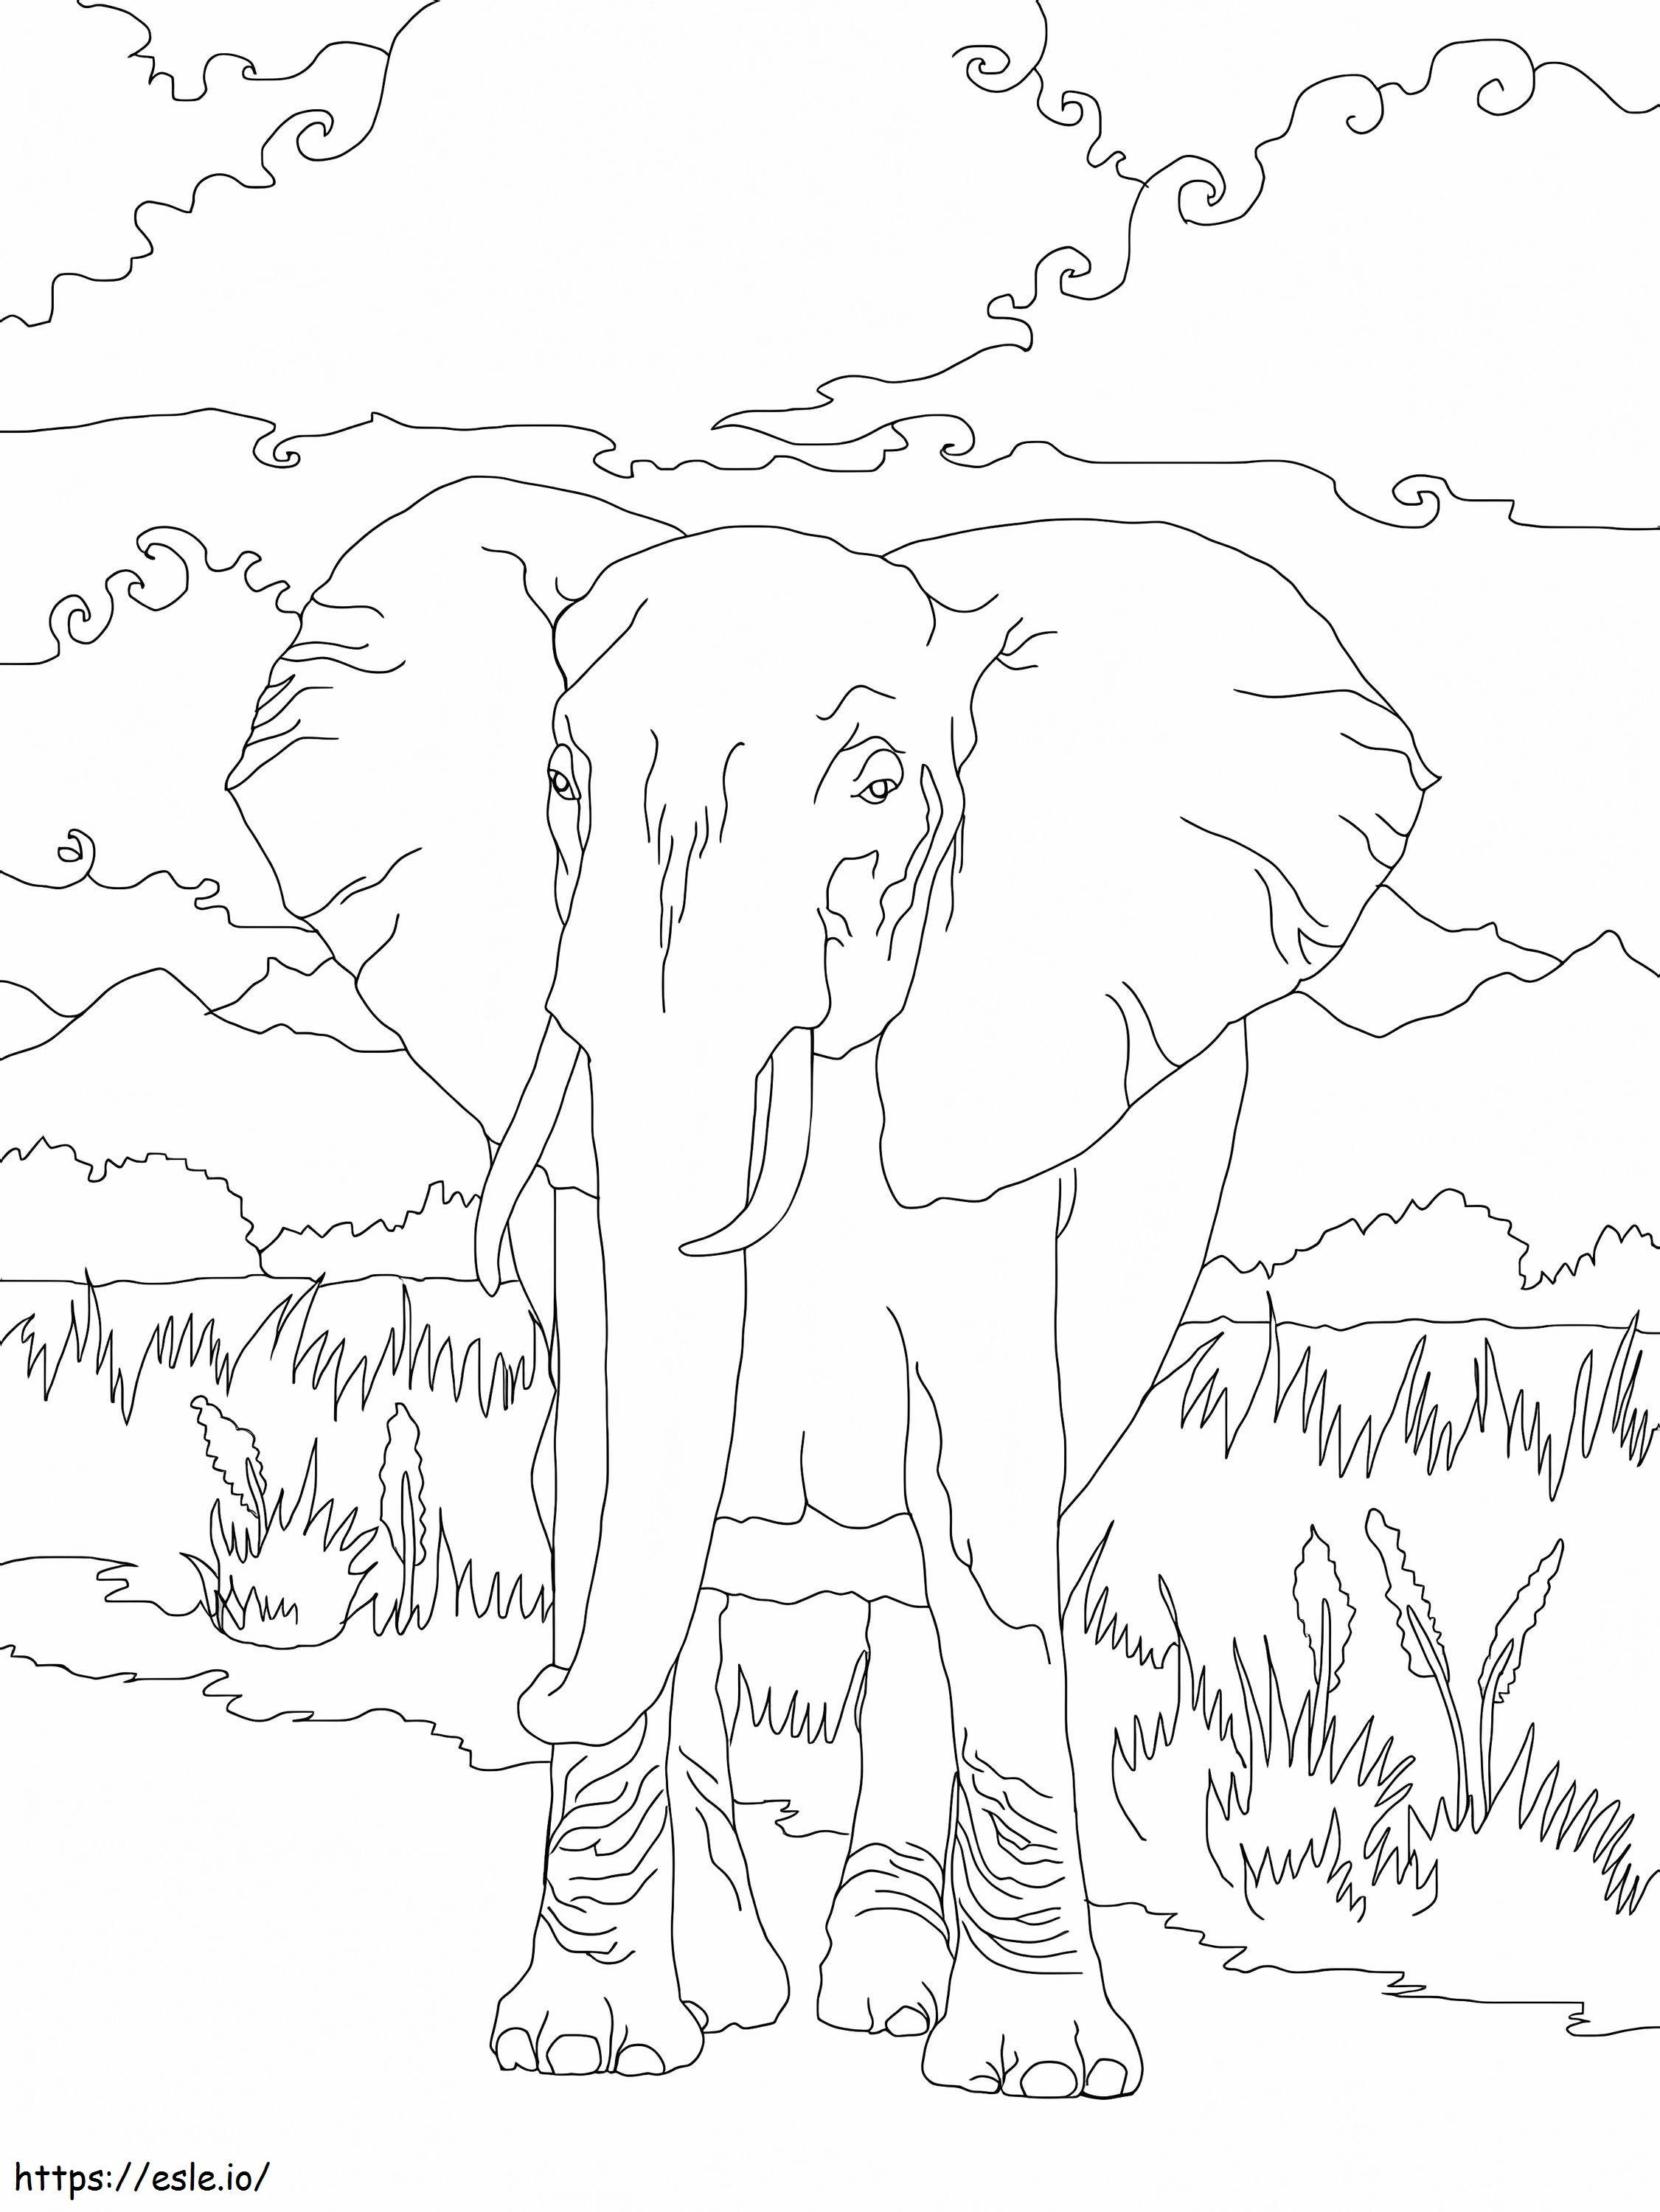 African Bush Elephant 1 coloring page